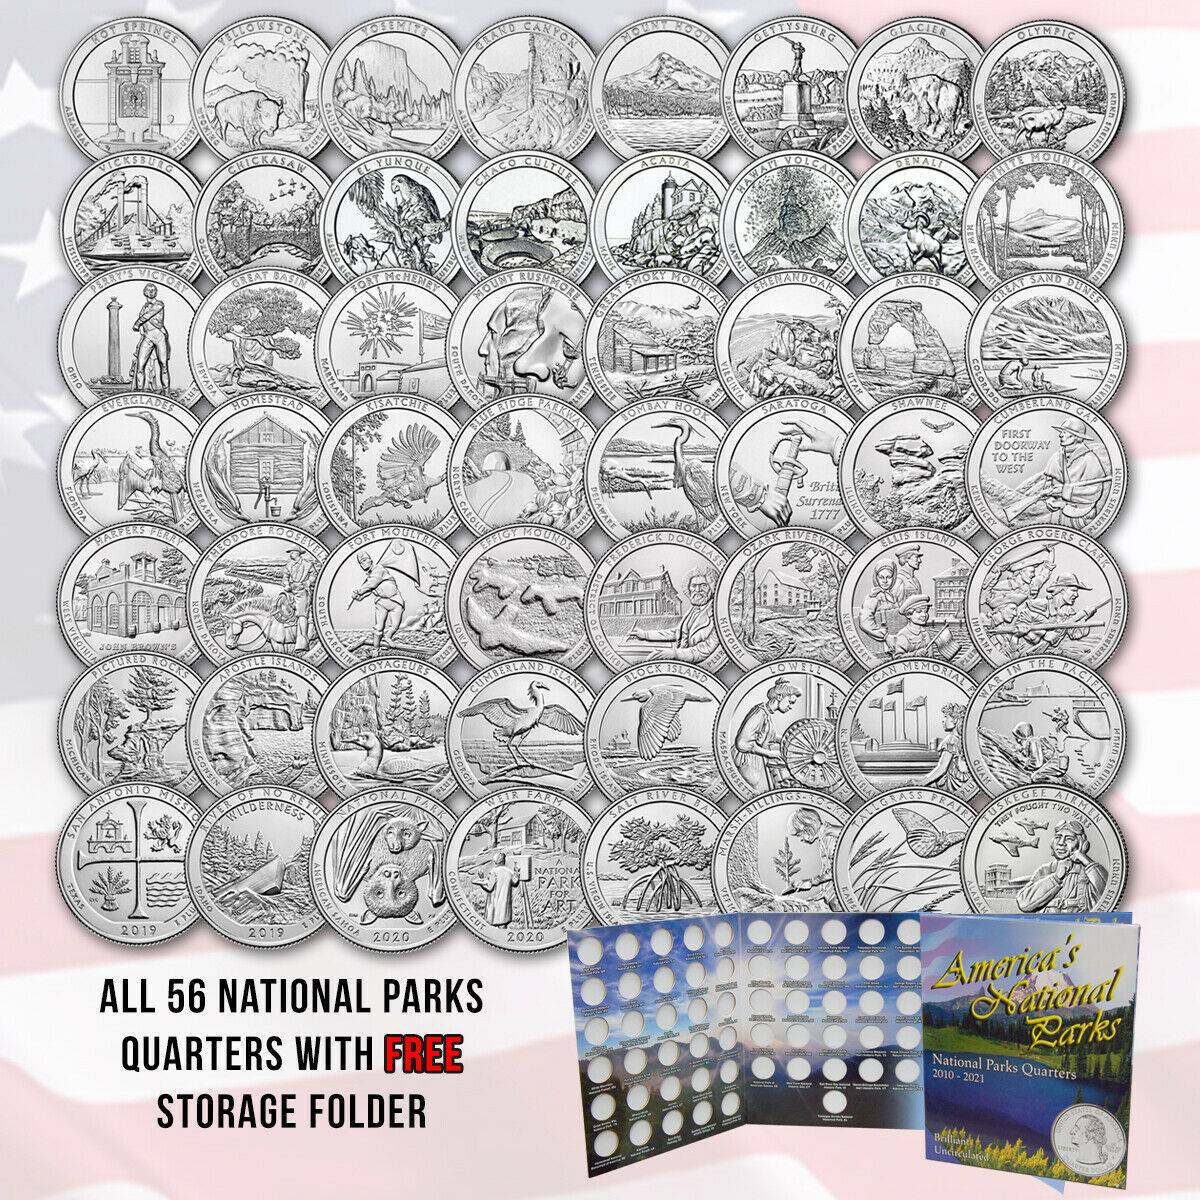 2019 P Complete Set of 5 National Park Quarters Uncirculated 